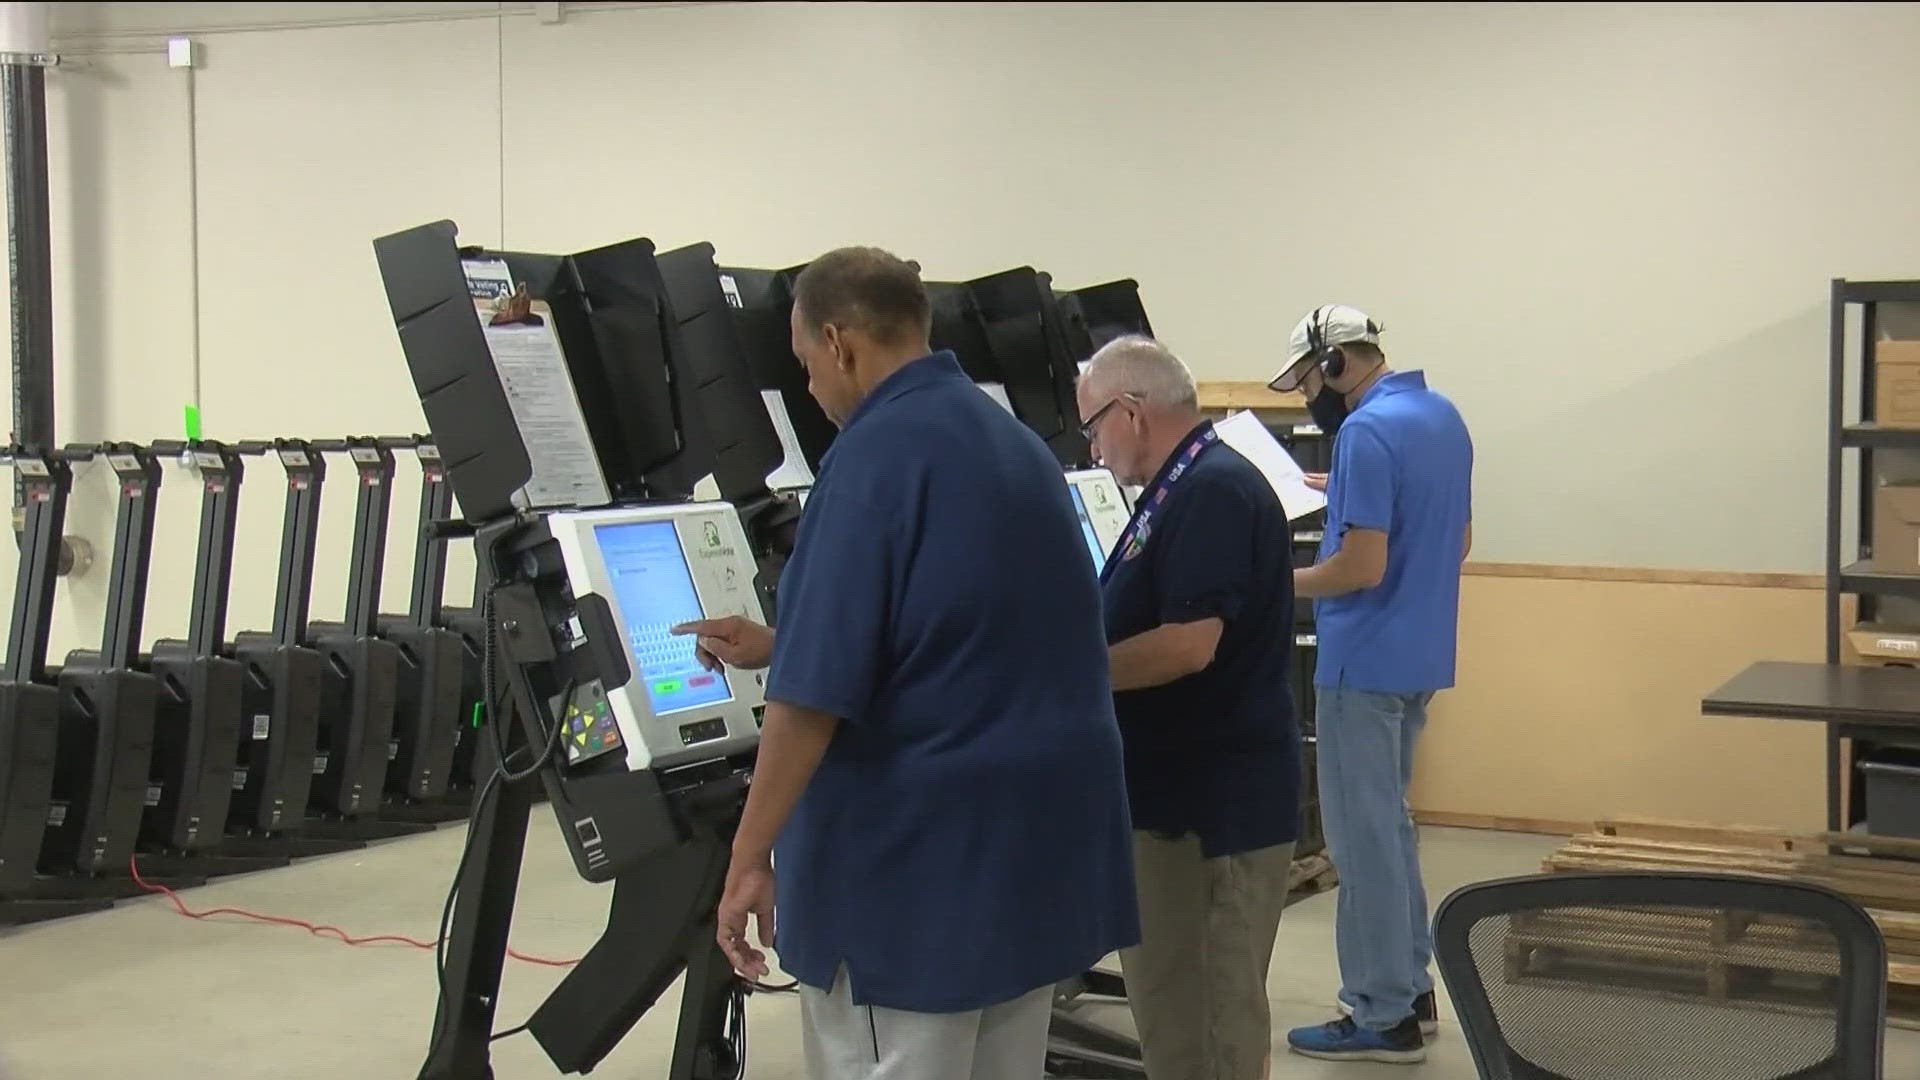 There are two statewide issues on the November ballot in Ohio.